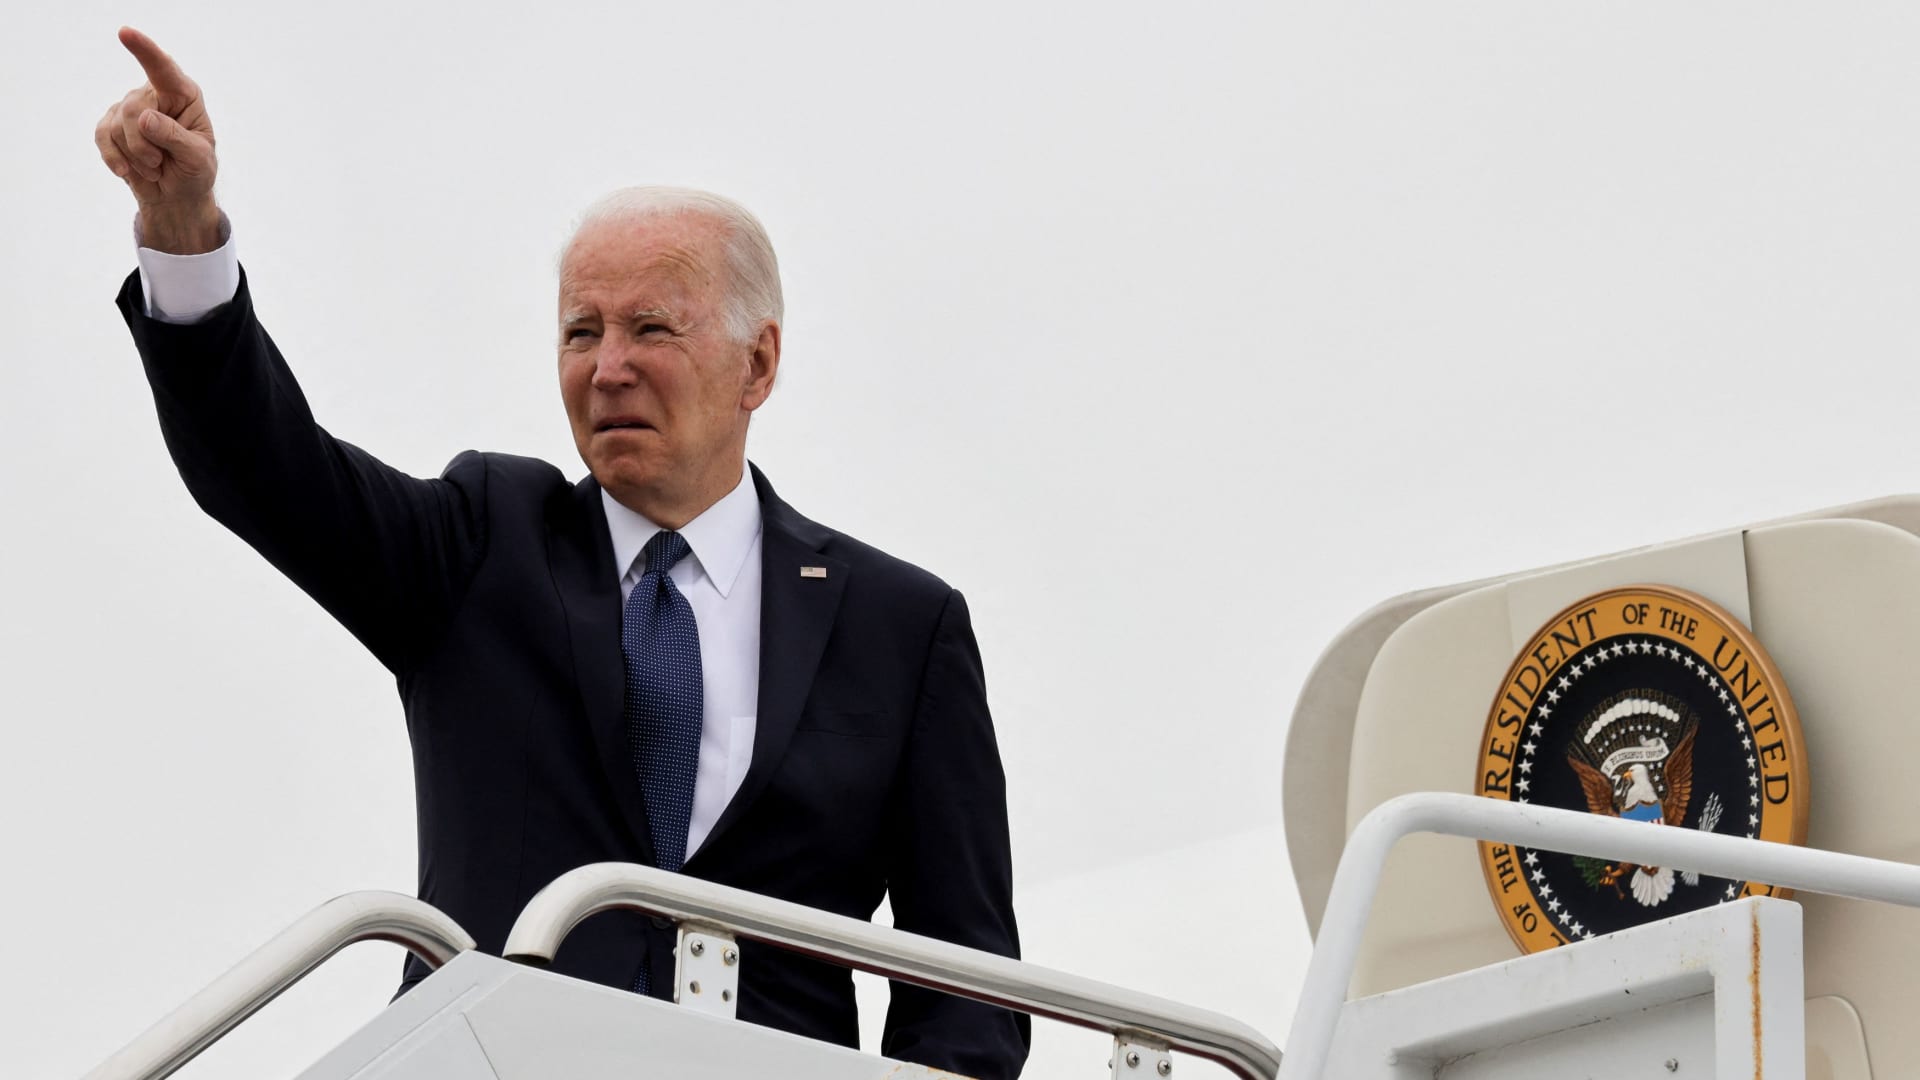 Biden will travel to Israel on Wednesday as war with Hamas drags into its second week